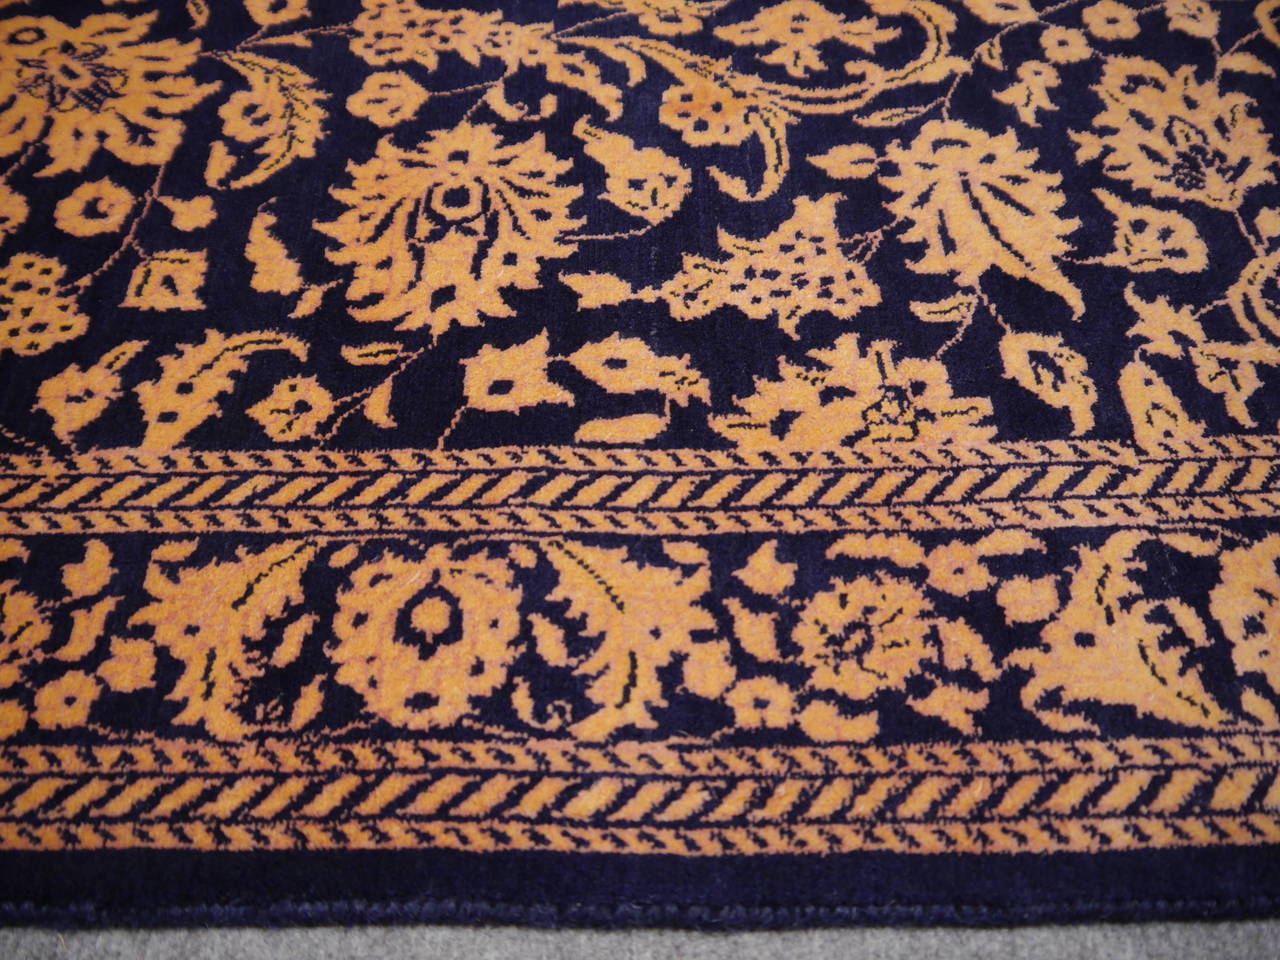 Hand-knotted in Srinagar with finest Cashmere wool and pure natural silk. Reduced color sheme with very dark blue woollen background and copper and dark orange pure silk design.